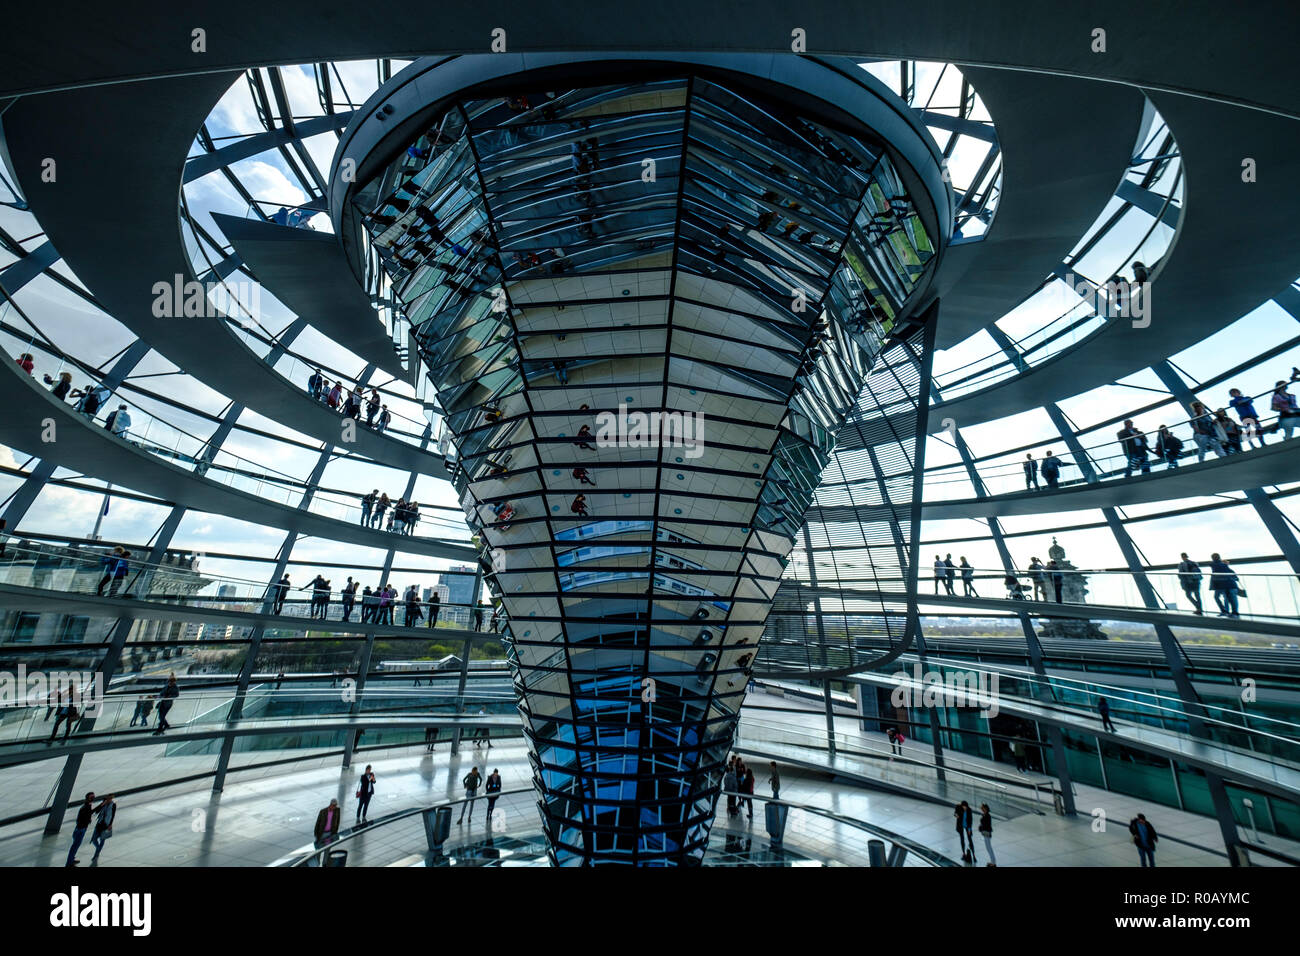 The Reichstag Dome, Berlin, Germany Stock Photo